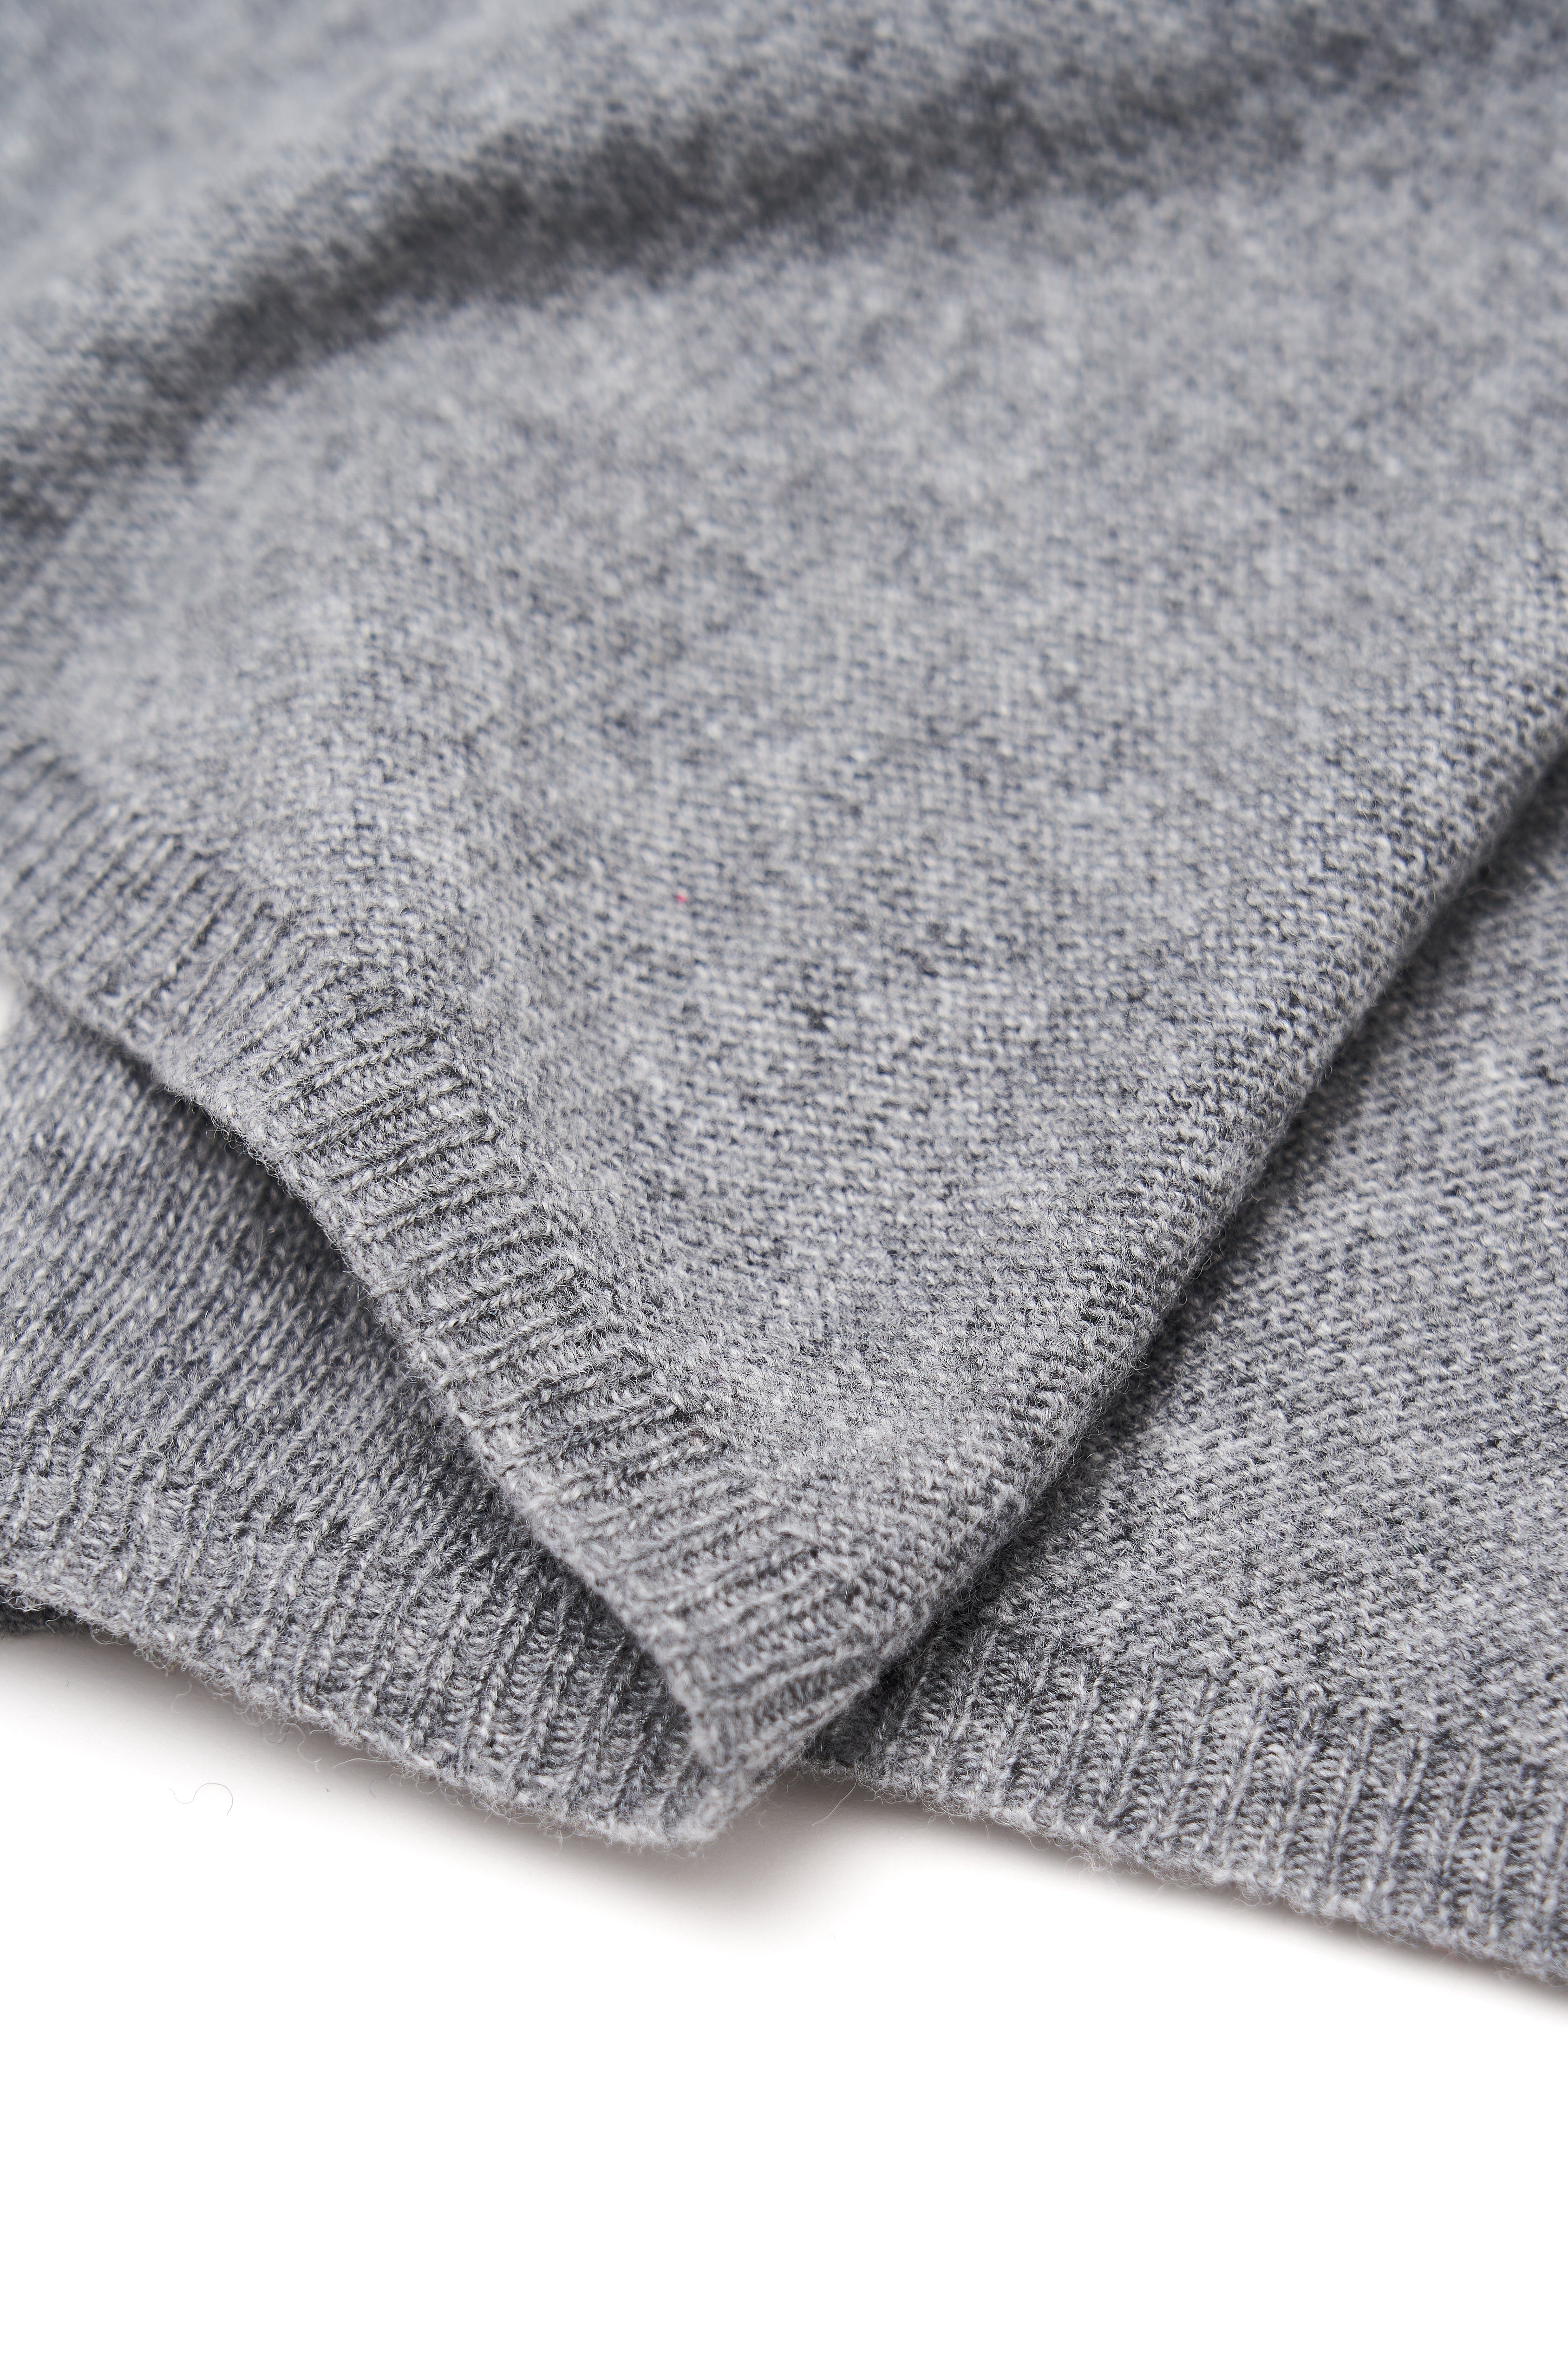 WOMEN GREY SCARF WITH CASHMERE